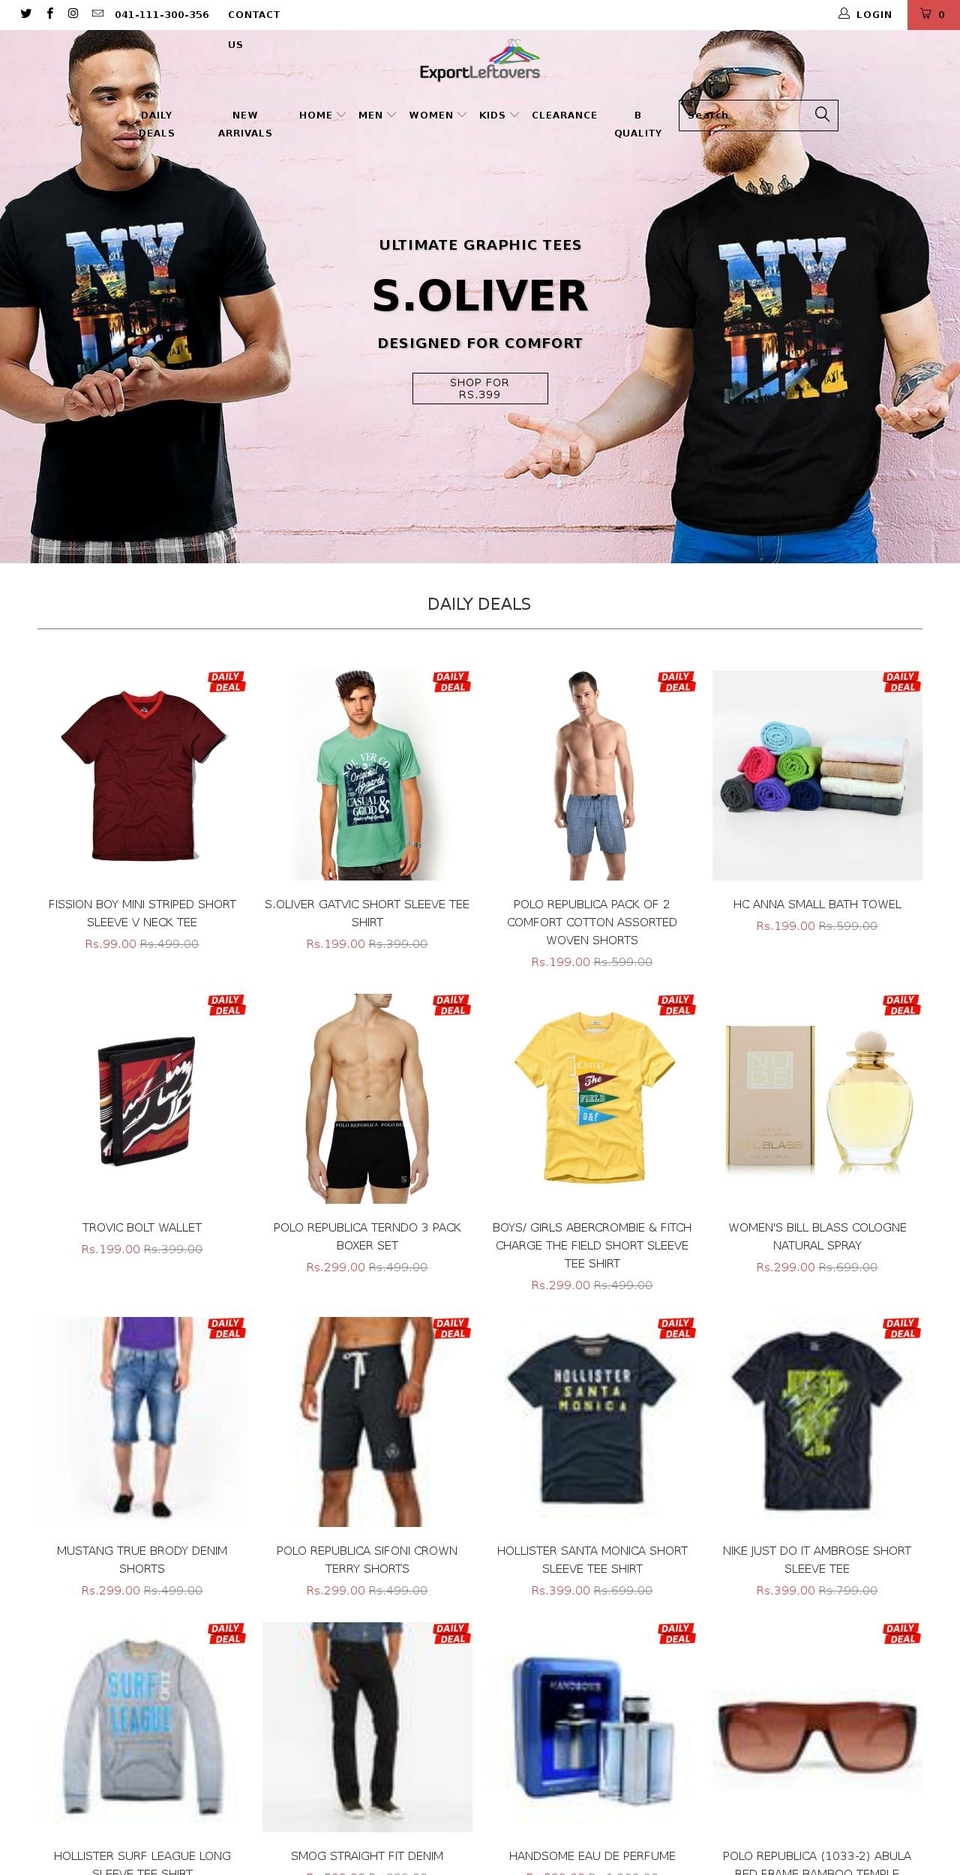 Dawn Shopify theme site example exportleftovers.com